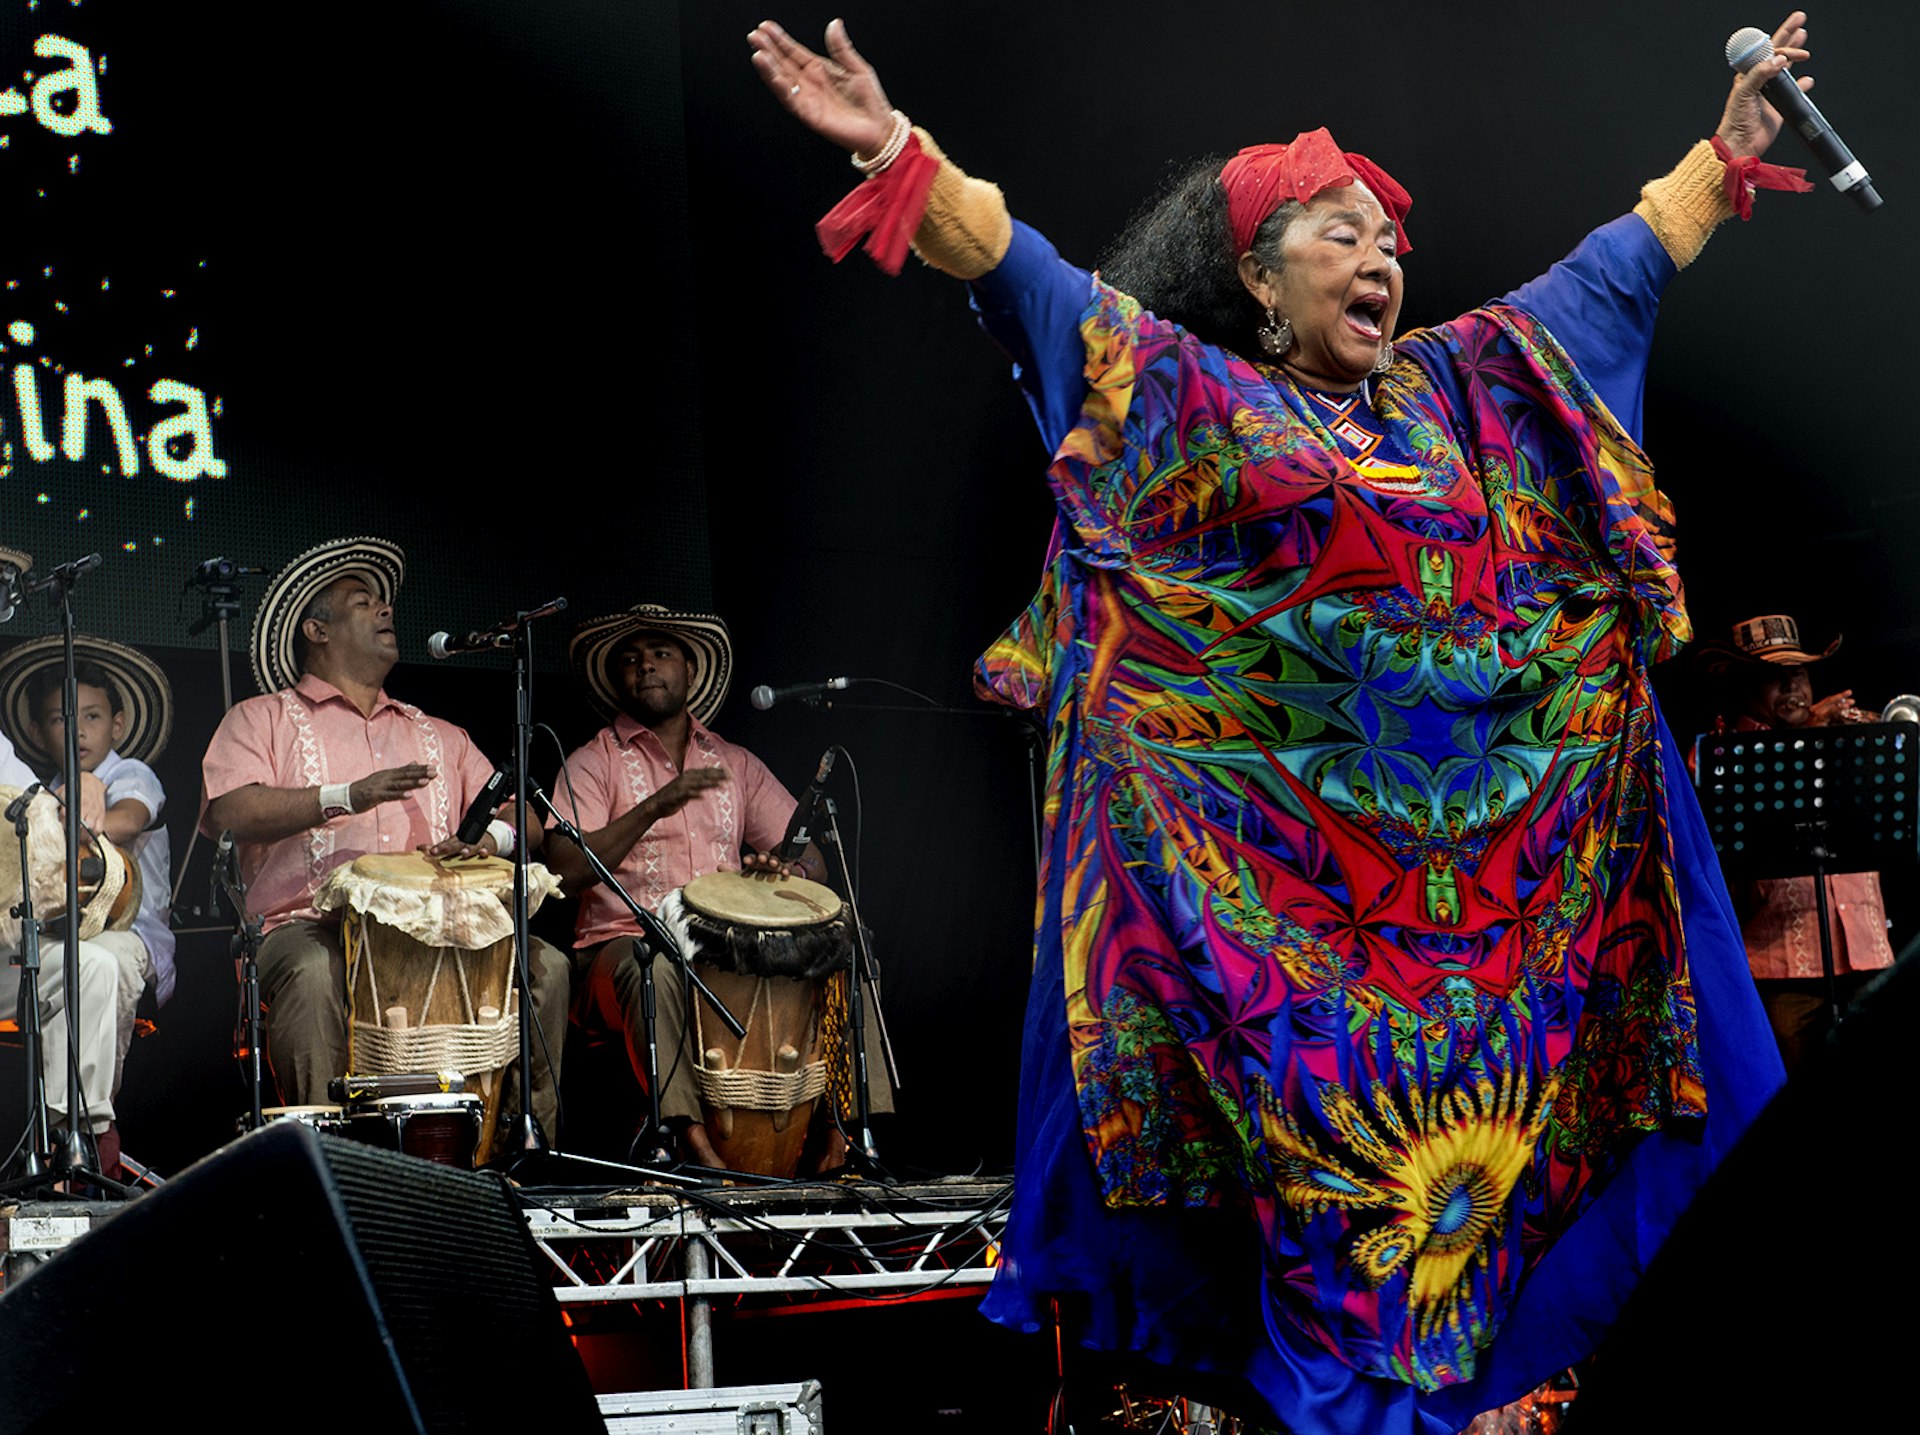 A singer wearing a colorful, flowing dress raises her hands to the crowd while men wearing wide-brimmed hats play the drums behind her